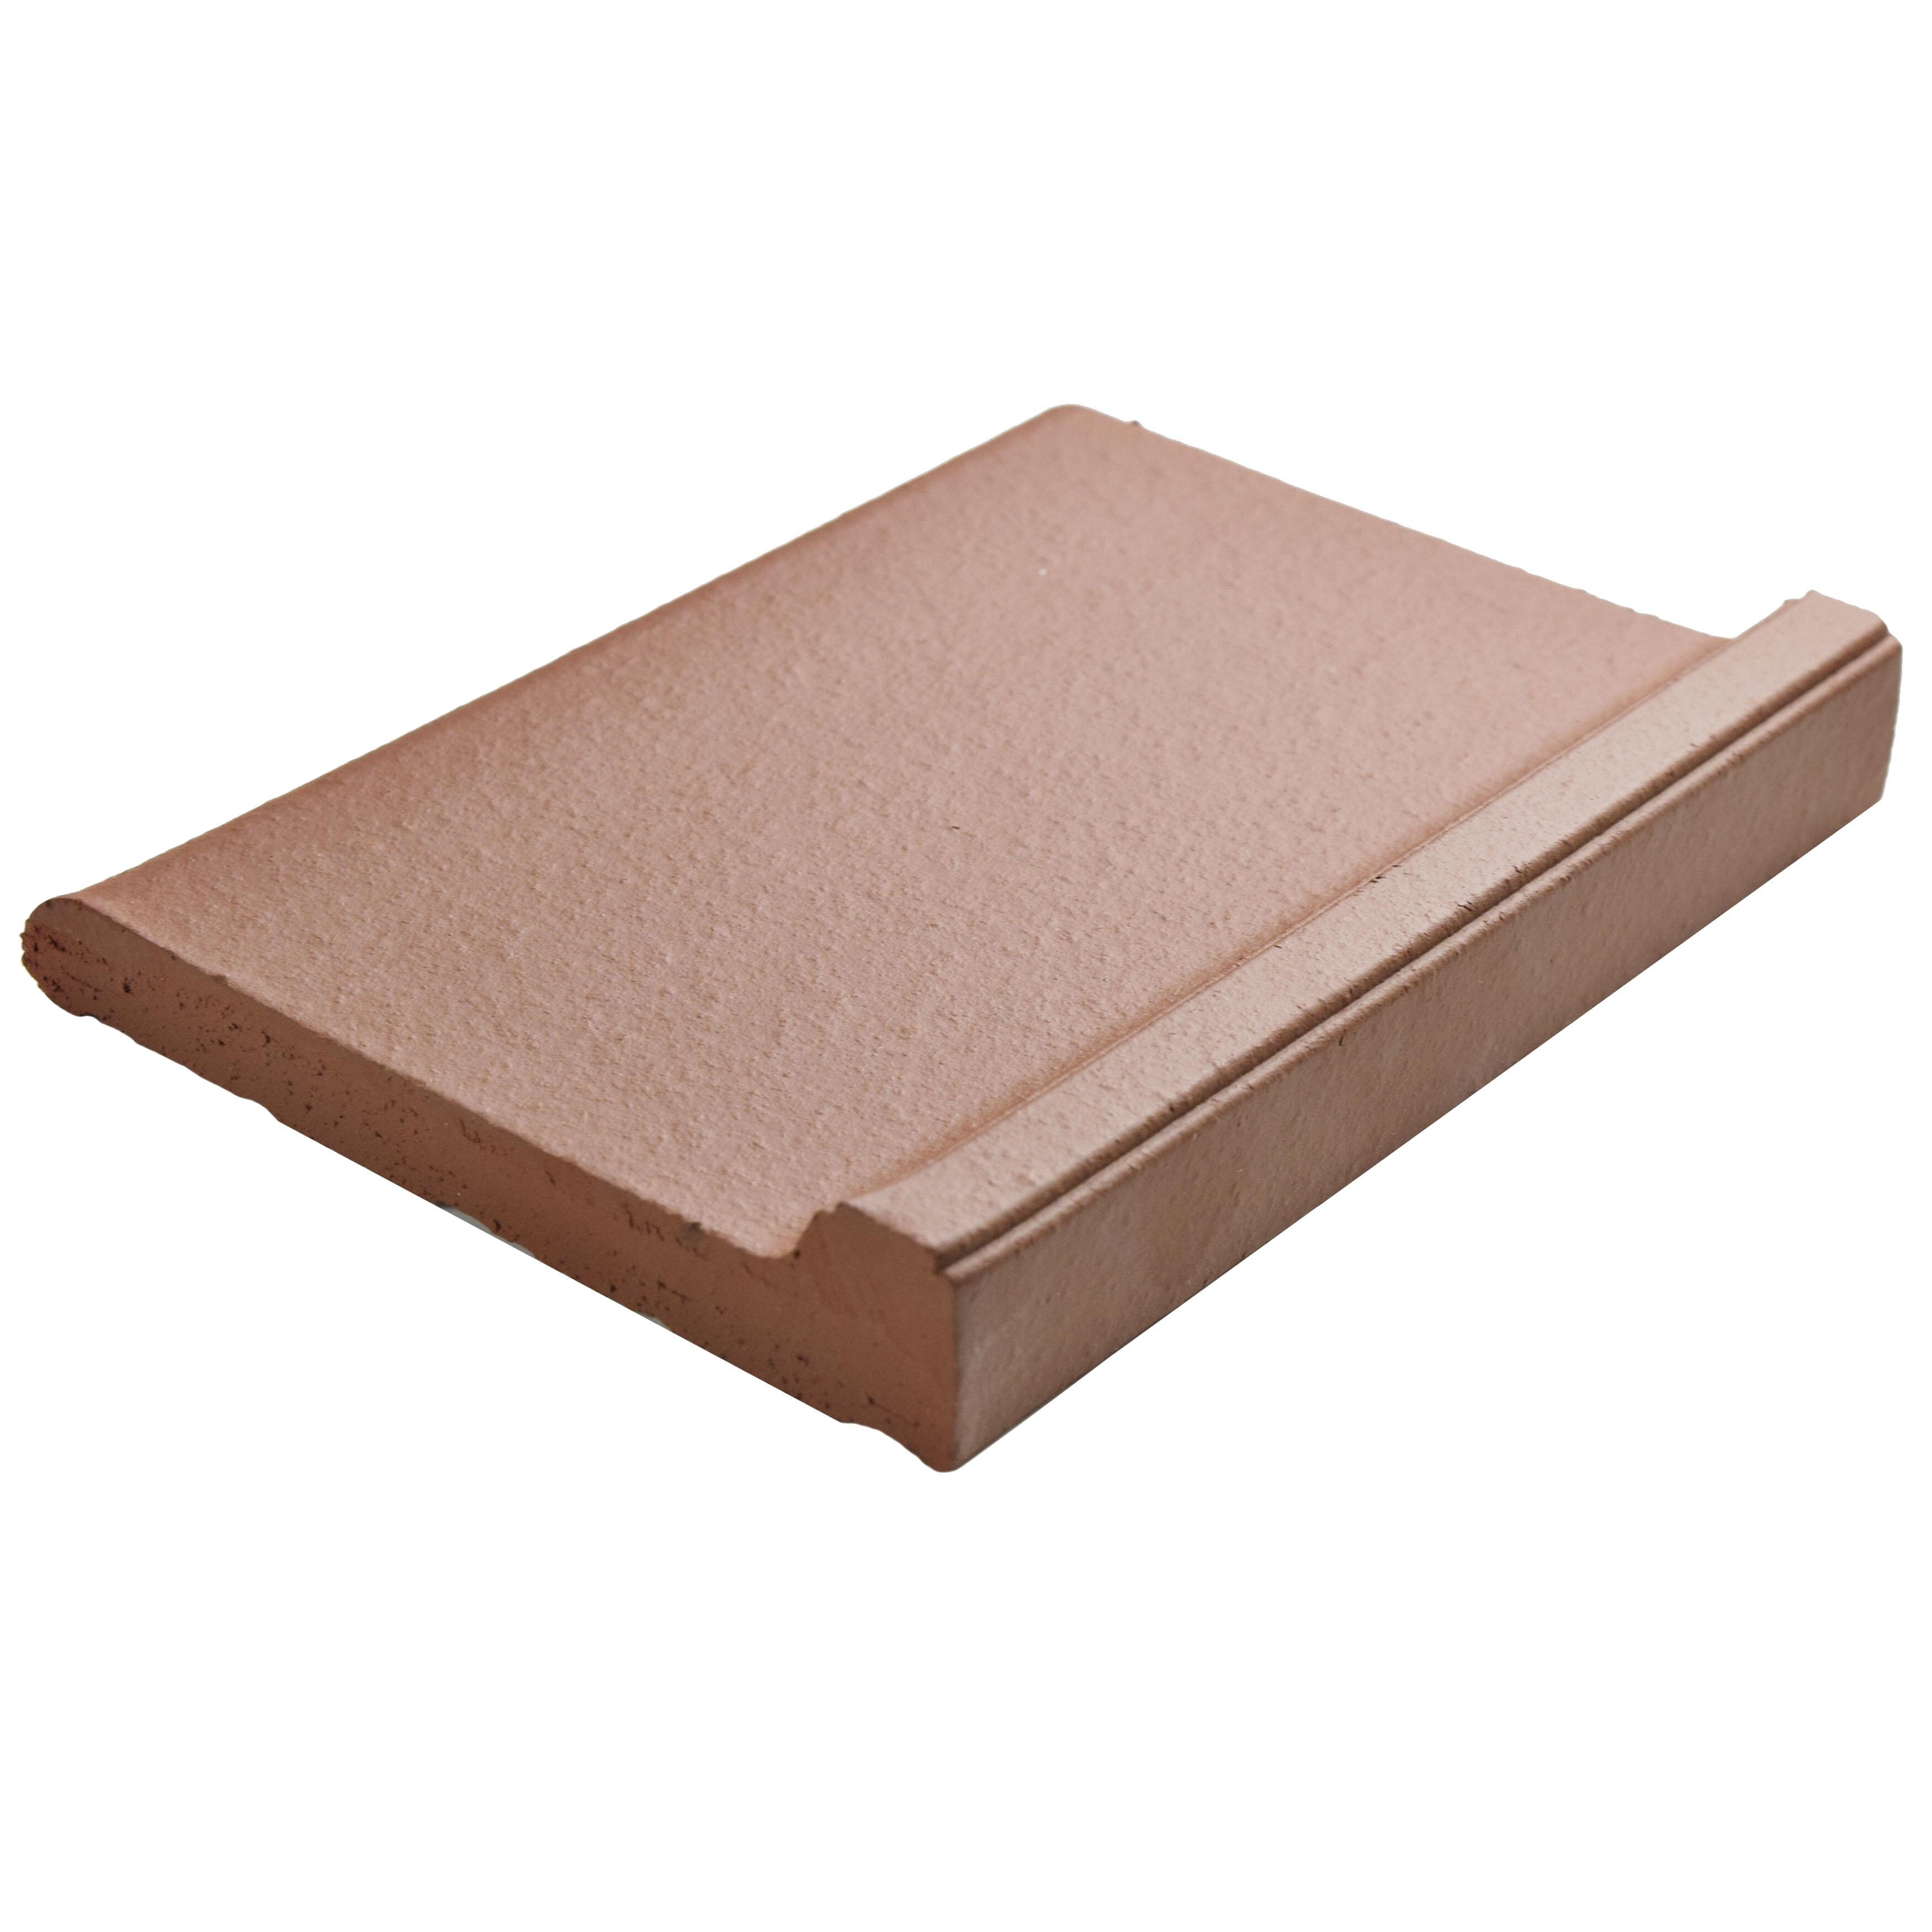 Merola Tile Quarry Red 4-3/8"x5-7/8" Ceramic Cove Base Trim Floor and Wall Tile - (1 Tile)